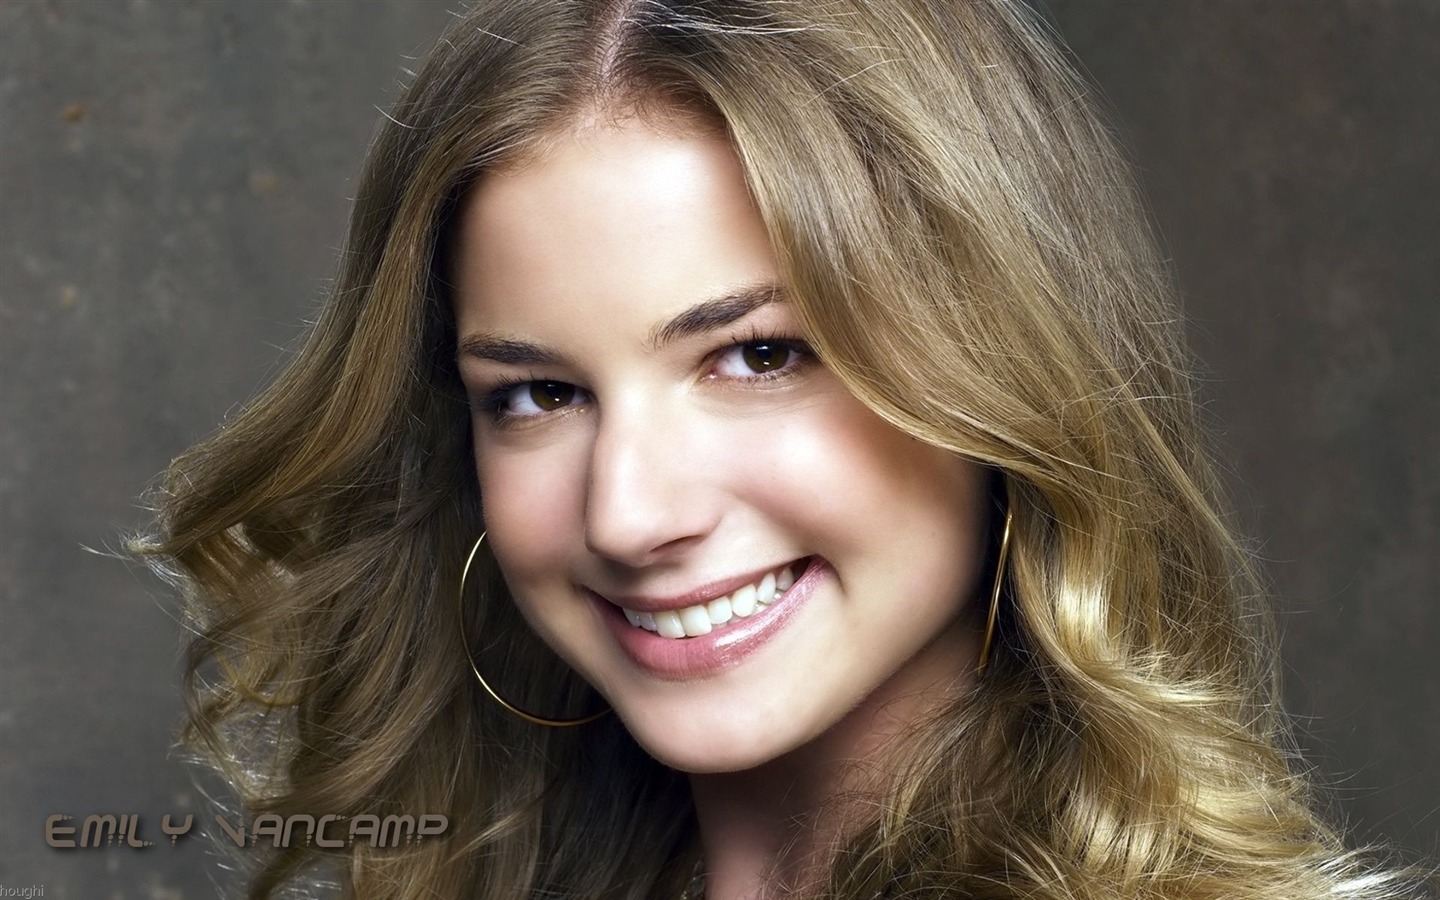 Emily VanCamp #006 - 1440x900 Wallpapers Pictures Photos Images